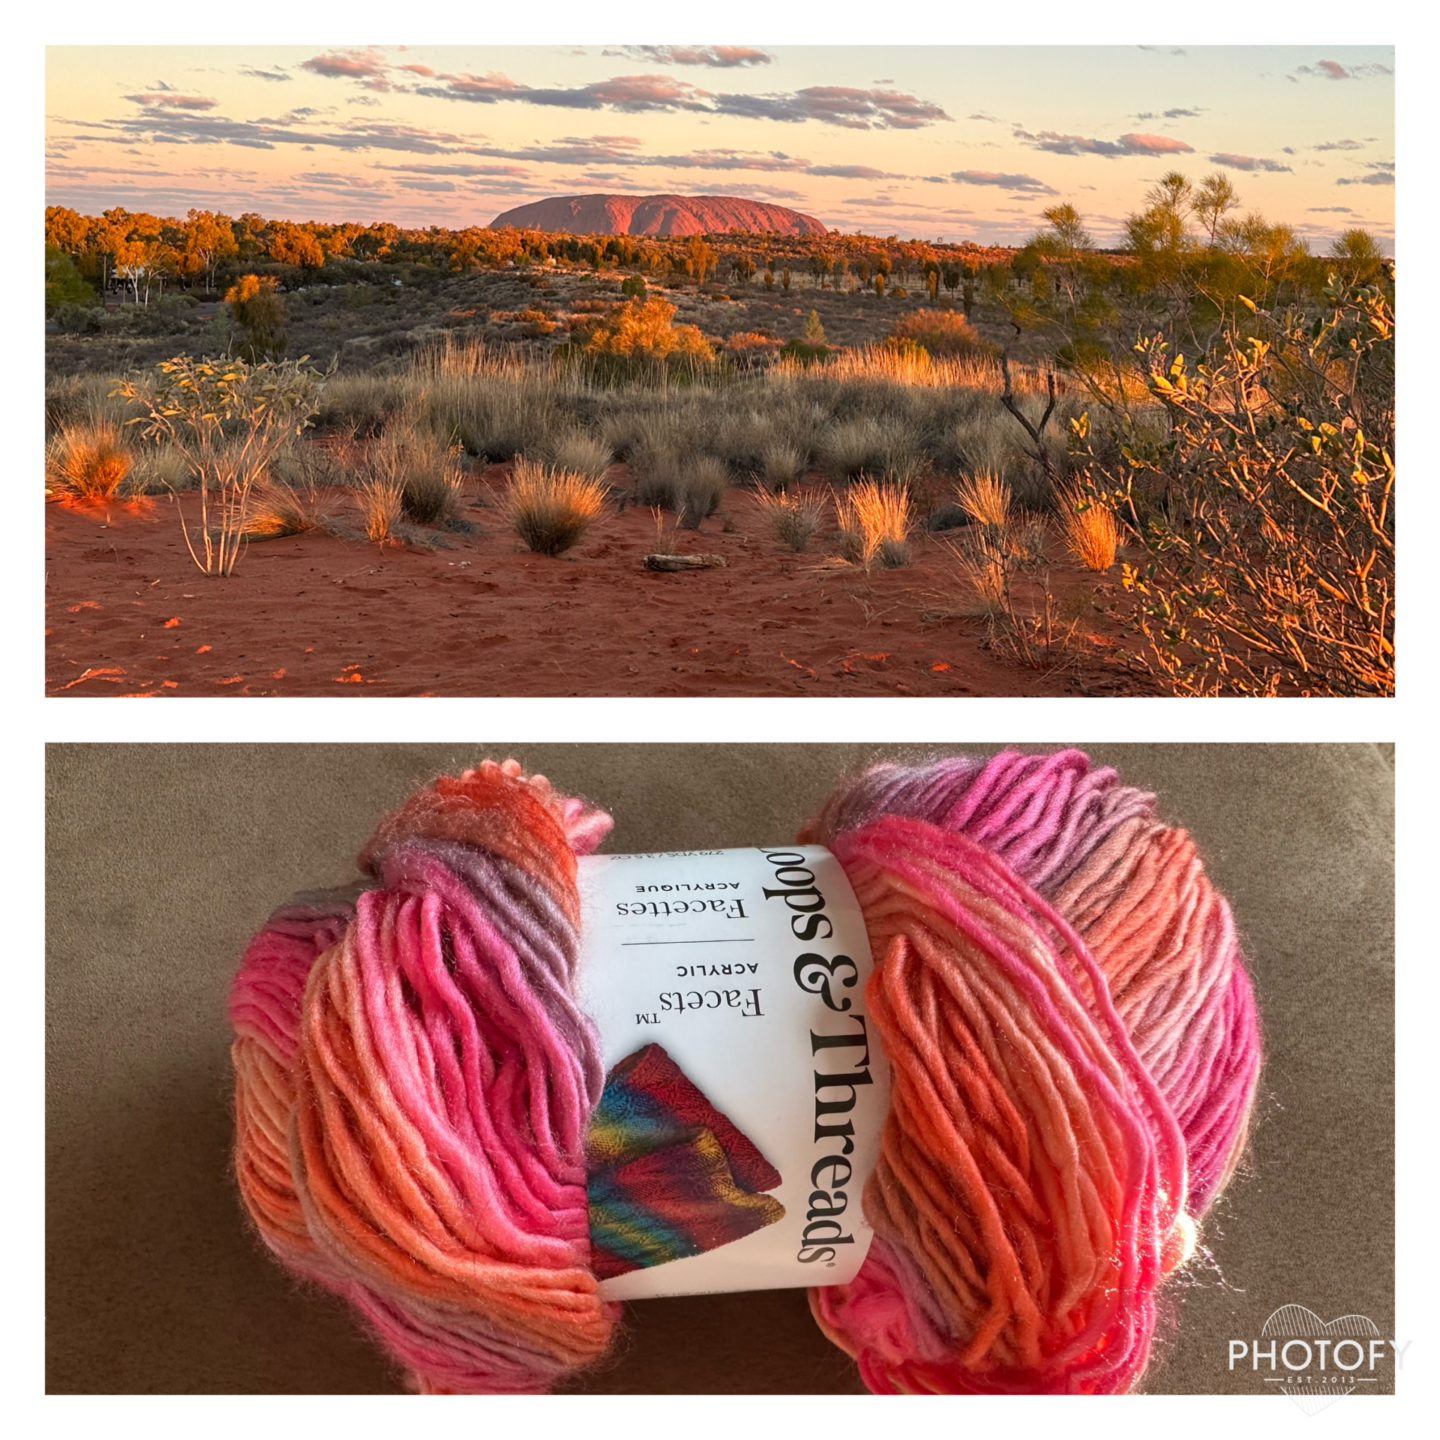 Gorgeous yarn for my new crochet scarf pattern! I named this pattern "Uluru Sunset scarf" since the colors really look like they're pulled from the picture! Easy and free crochet scarf pattern